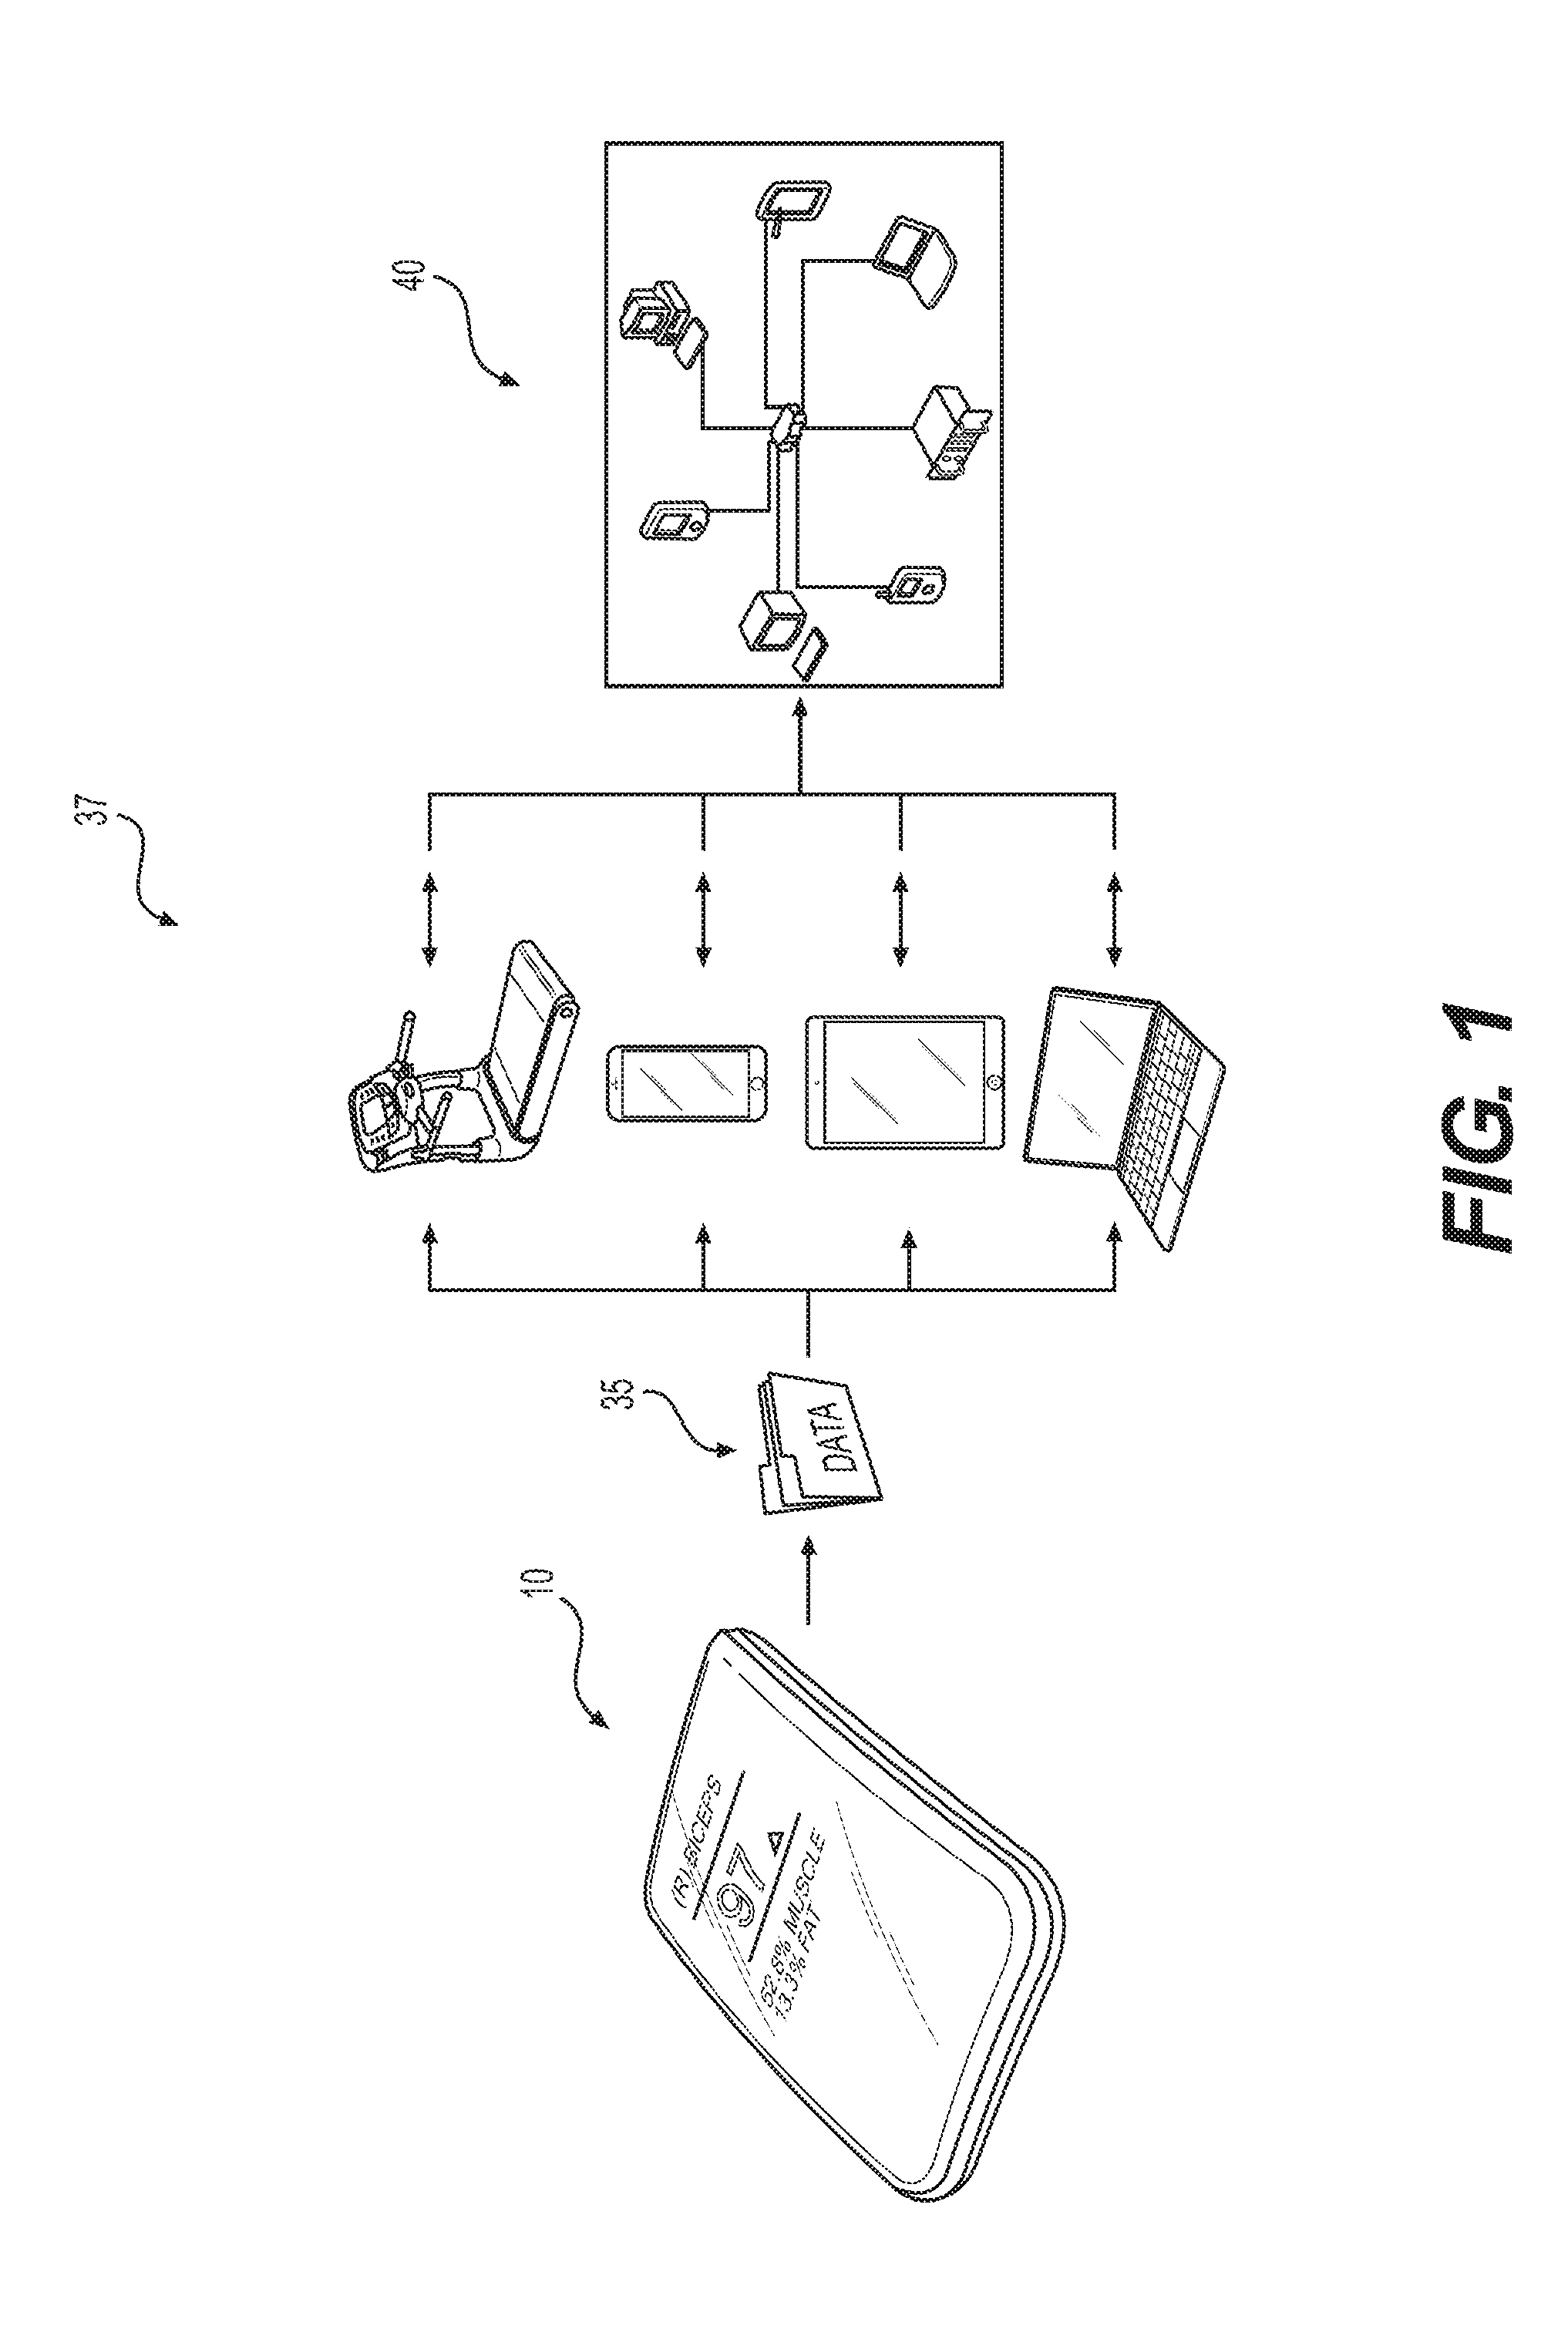 Systems and methods for measurement of bioimpedance